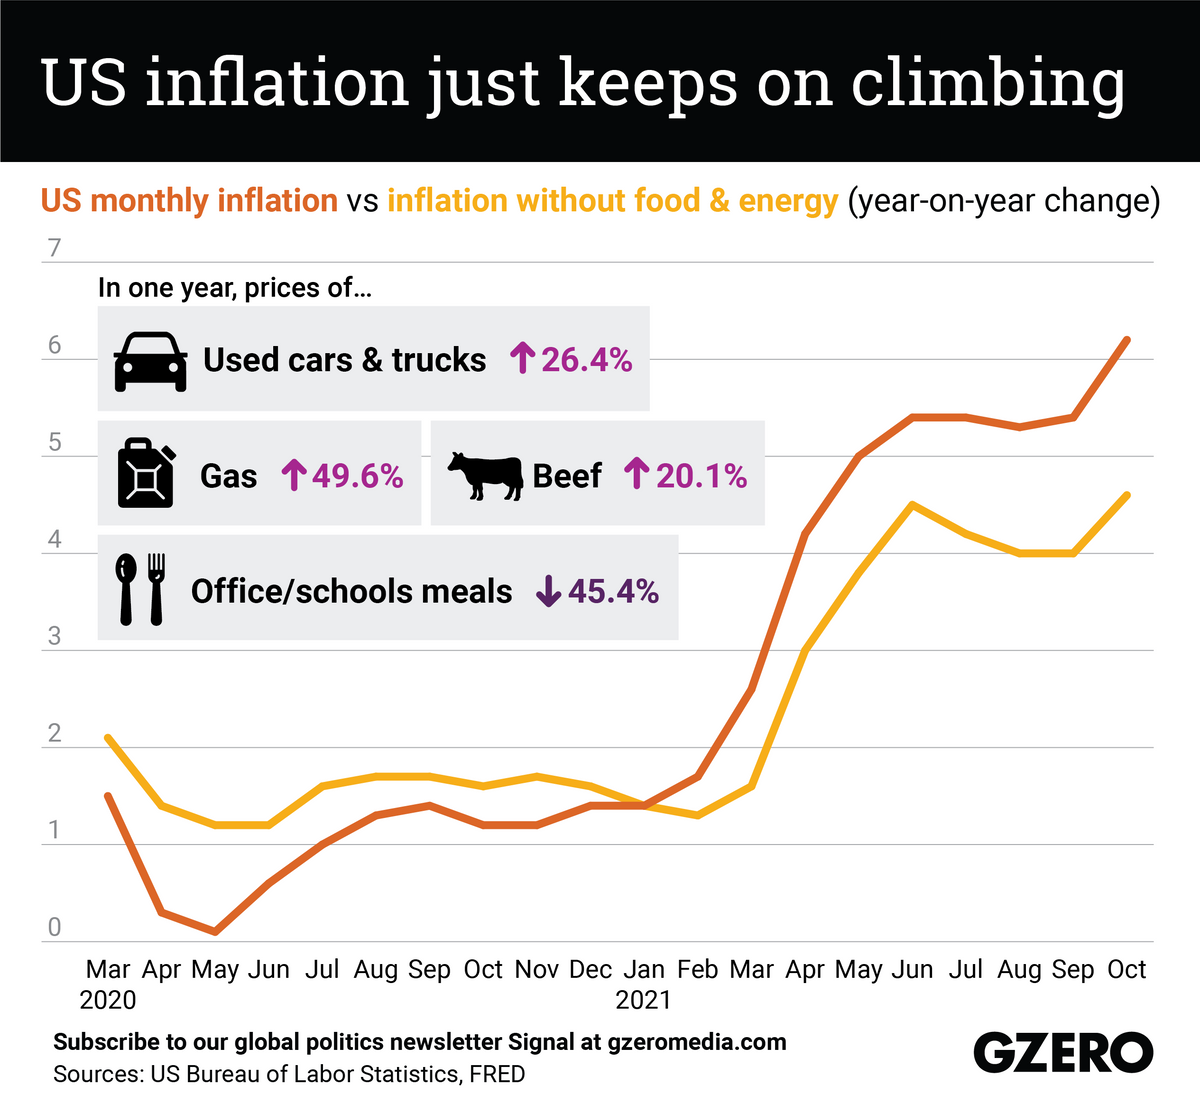 The Graphic Truth: US inflation just keeps on climbing